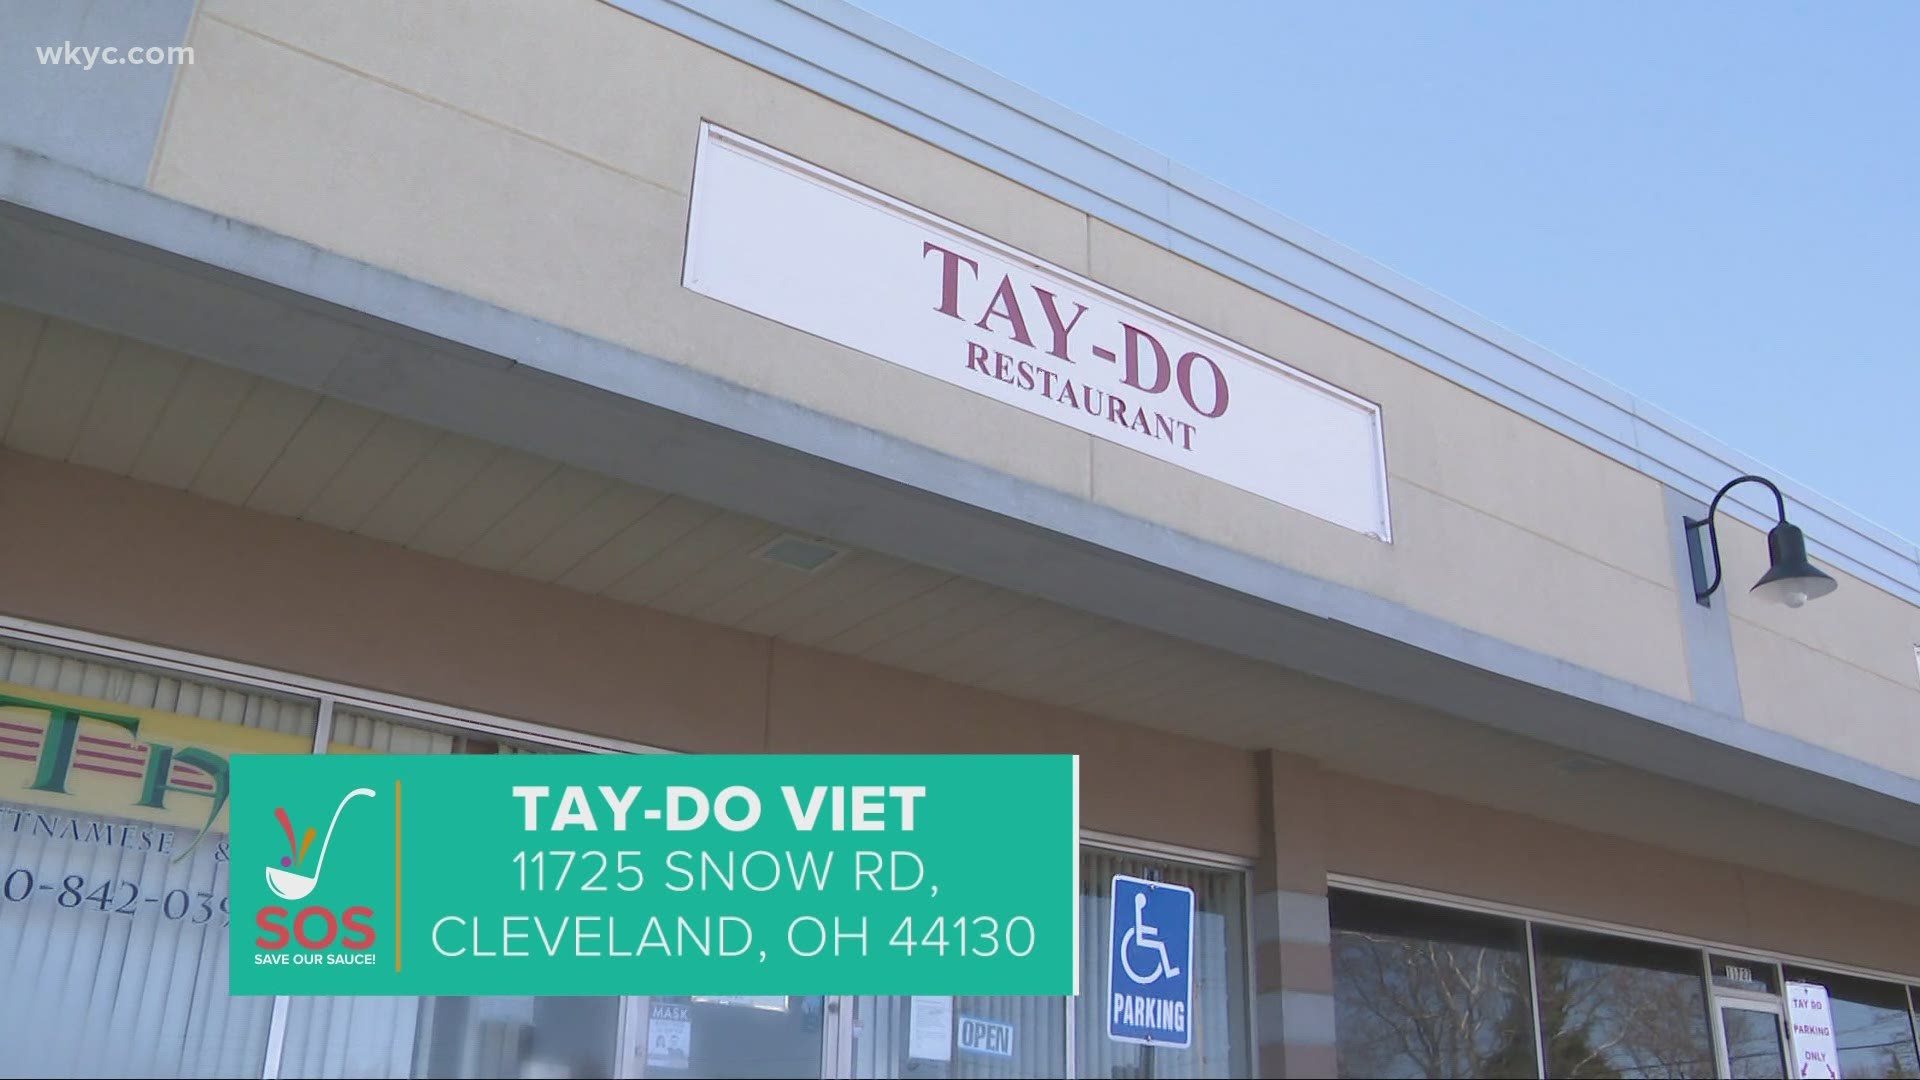 We're highlighting Tay-Do Restaurant as we continue the 'Save Our Sauce' campaign to show support of Northeast Ohio restaurants amid the COVID-19 pandemic.